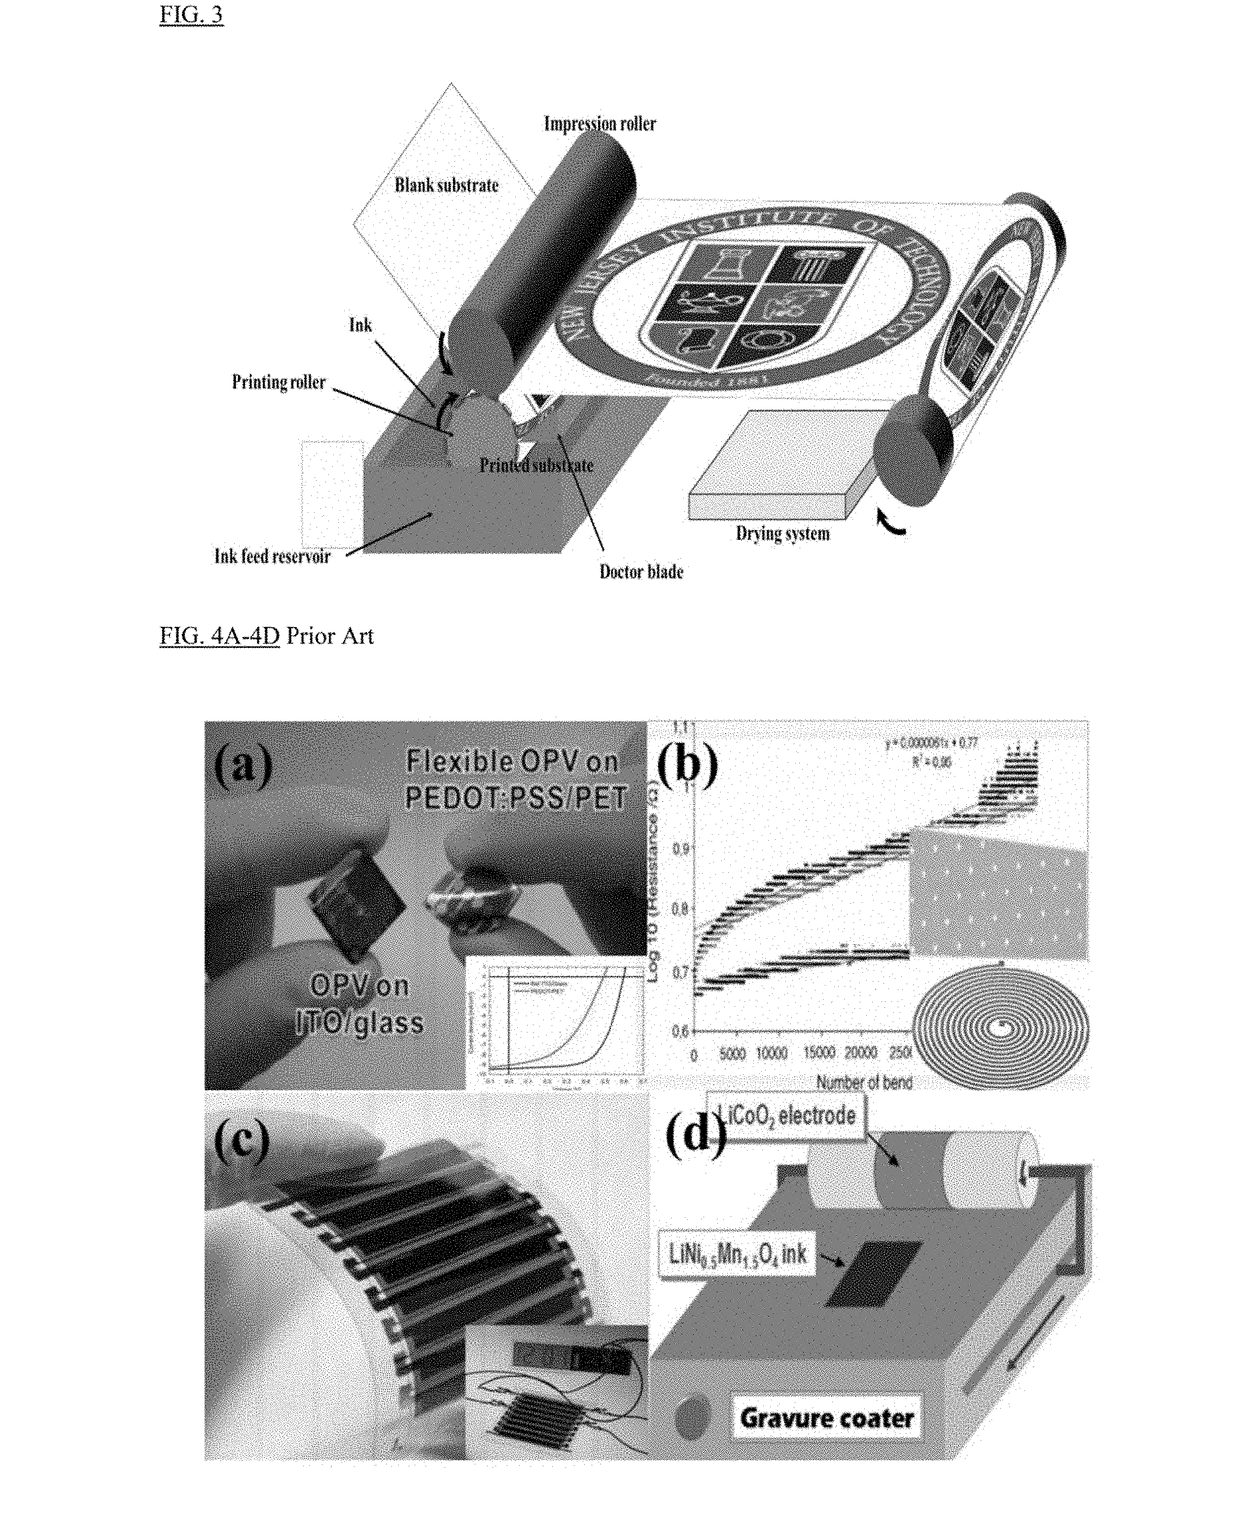 Fabrication of flexible conductive items and batteries using modified inks